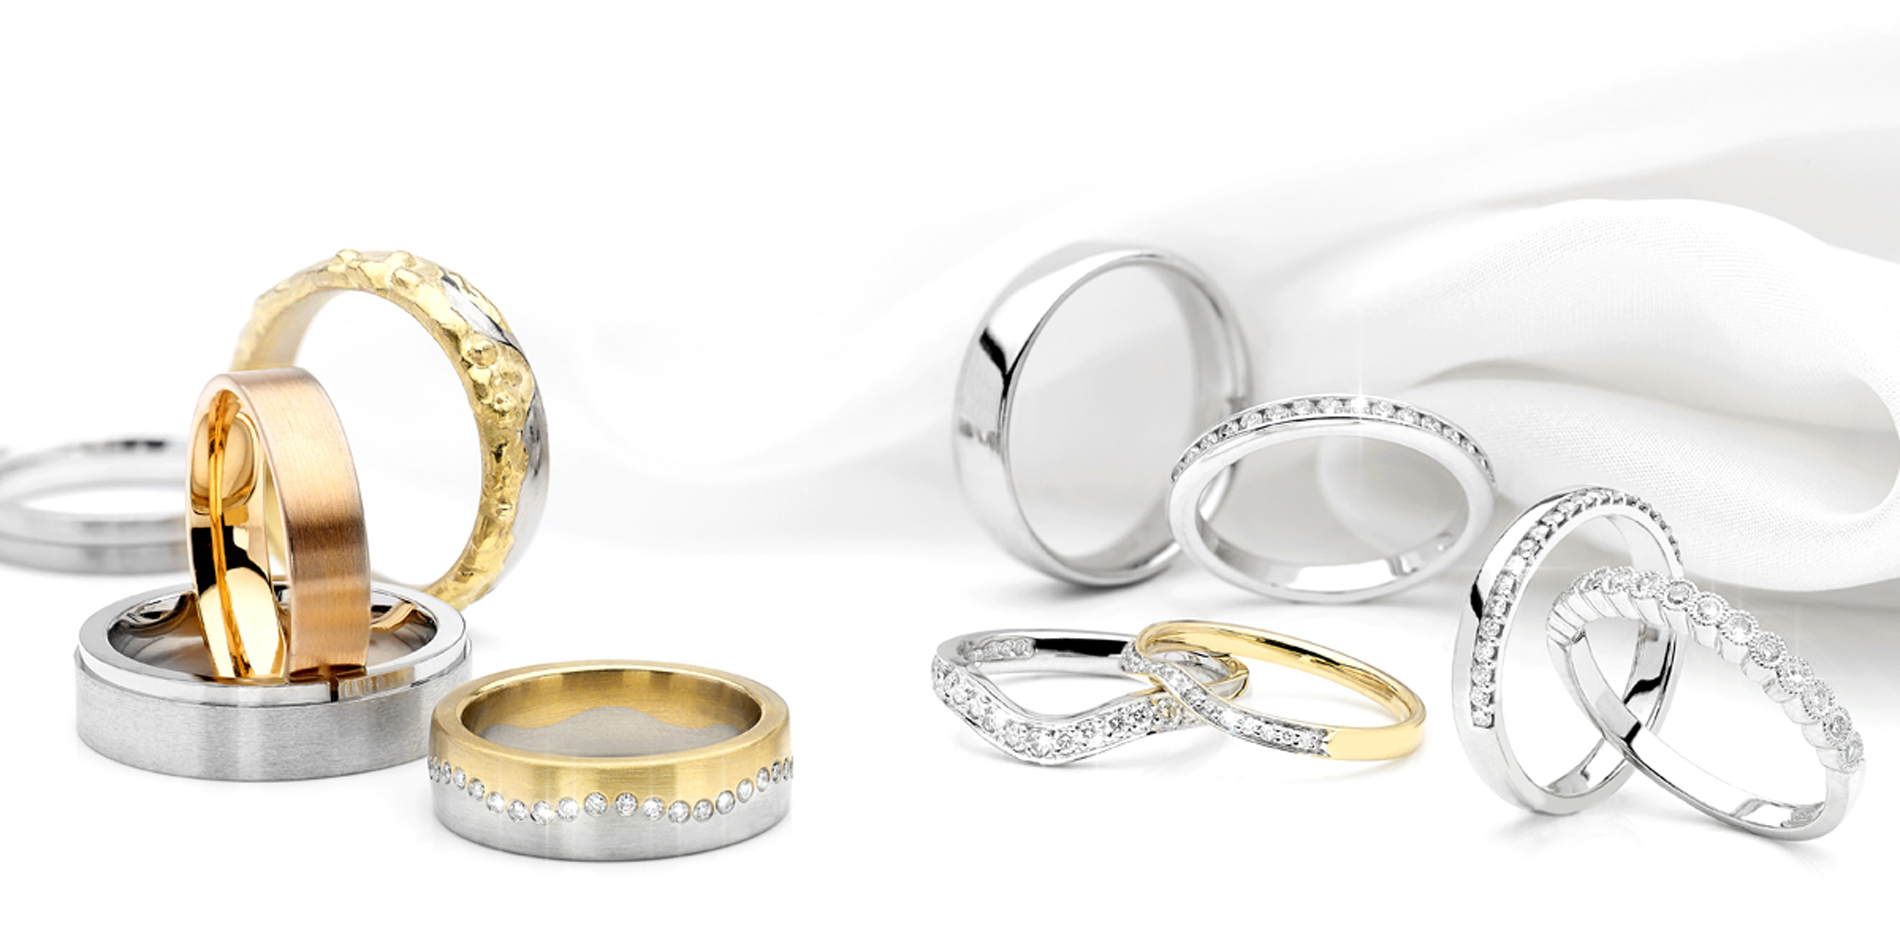 Discover 4 Designer Diamond Rings from Hudson Poole